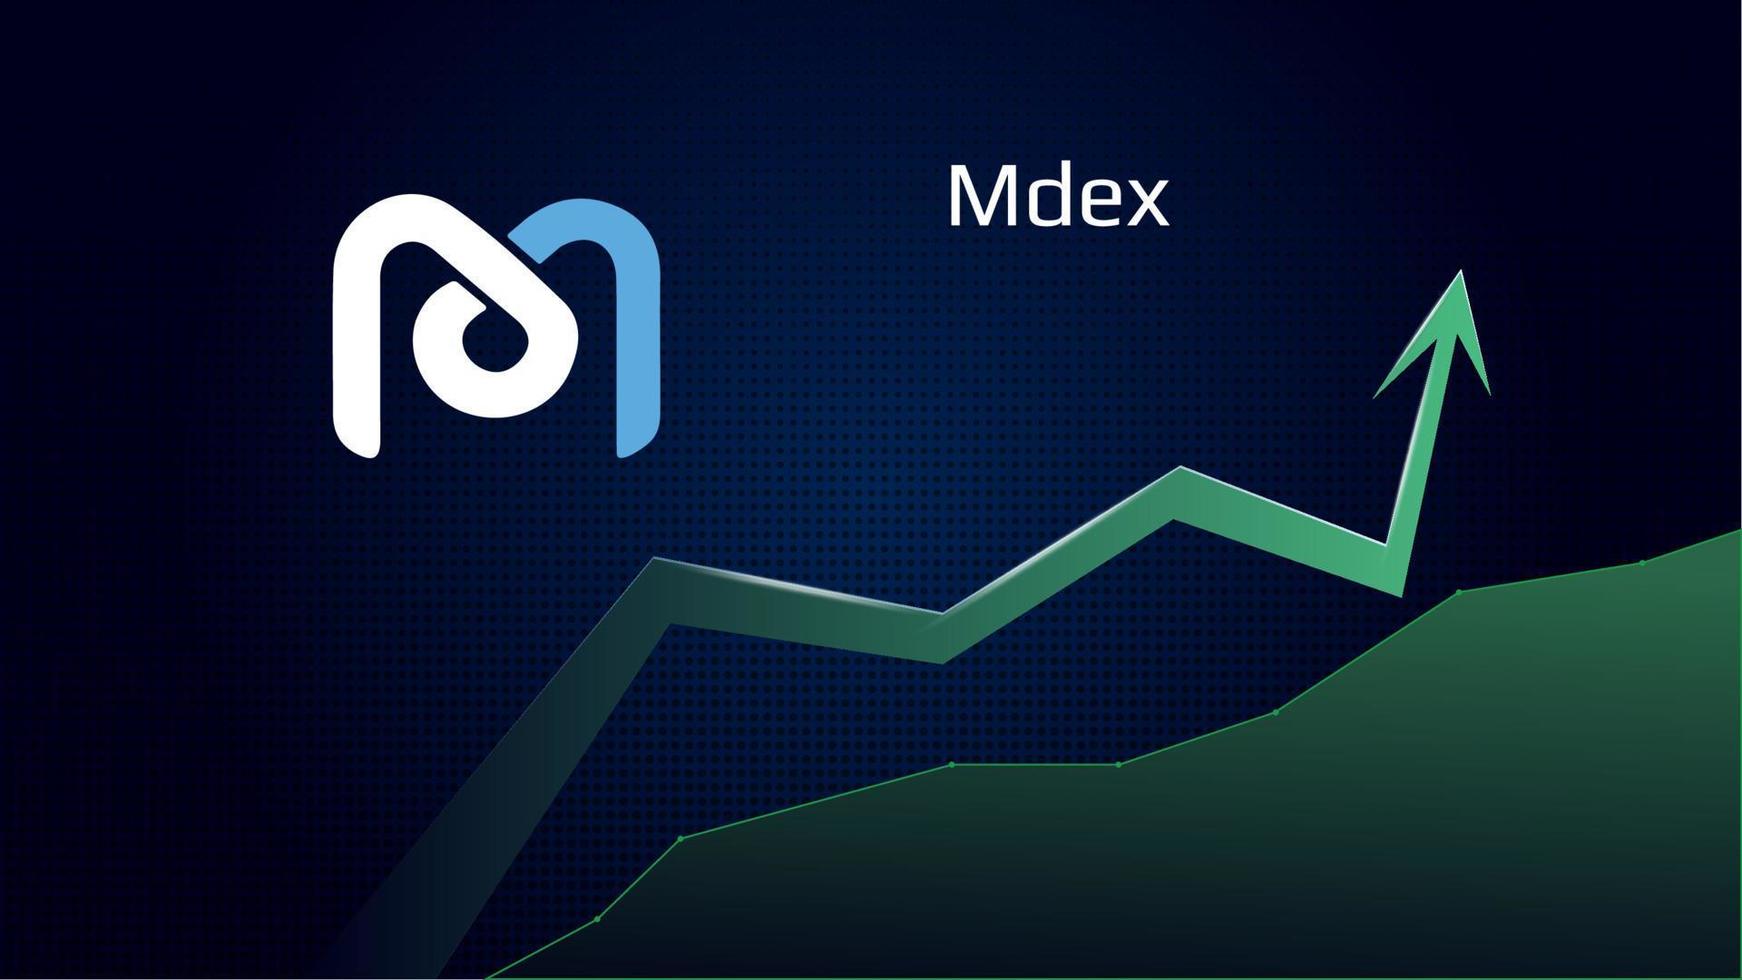 Mdex MDX in uptrend and price is rising. Cryptocurrency coin symbol and green up arrow. Uniswap flies to the moon. Vector illustration.